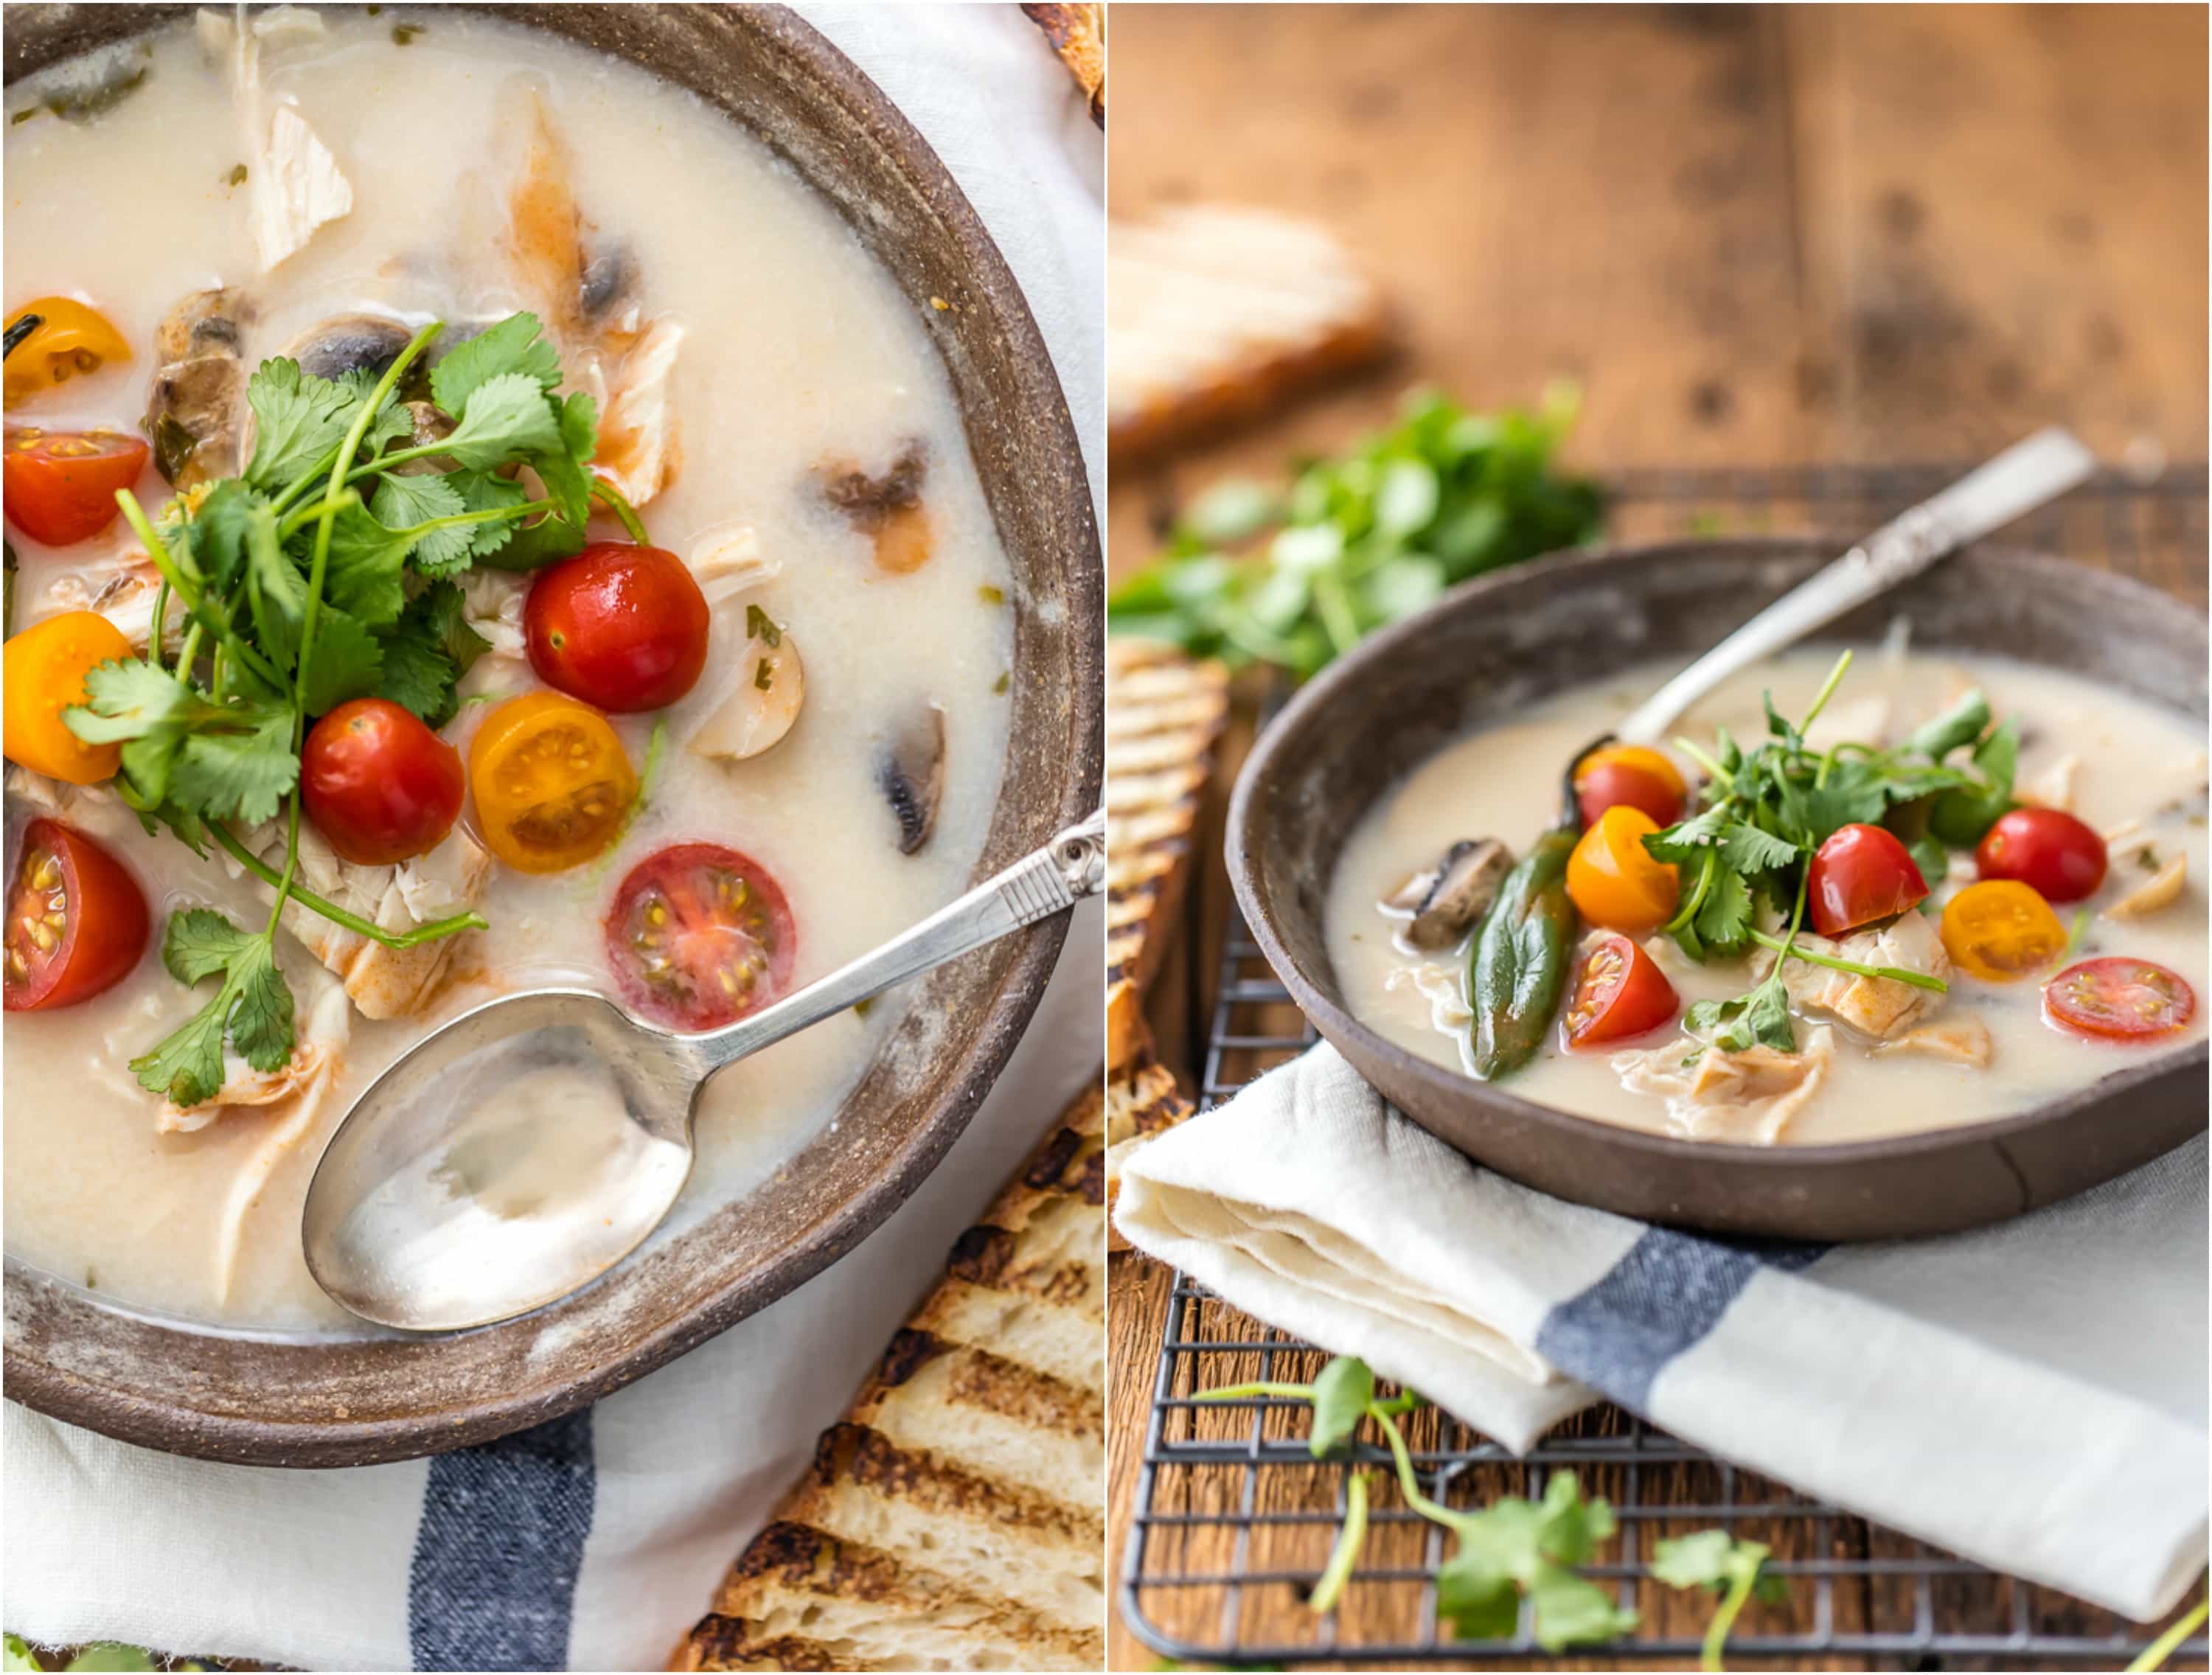 Thai Coconut Chicken Soup is healthy, EASY, and SO DELICIOUS! Loaded with cilantro, mushrooms, chicken, tomato, and chiles; so much flavor in such an easy Thai recipe! Perfect soup recipe!